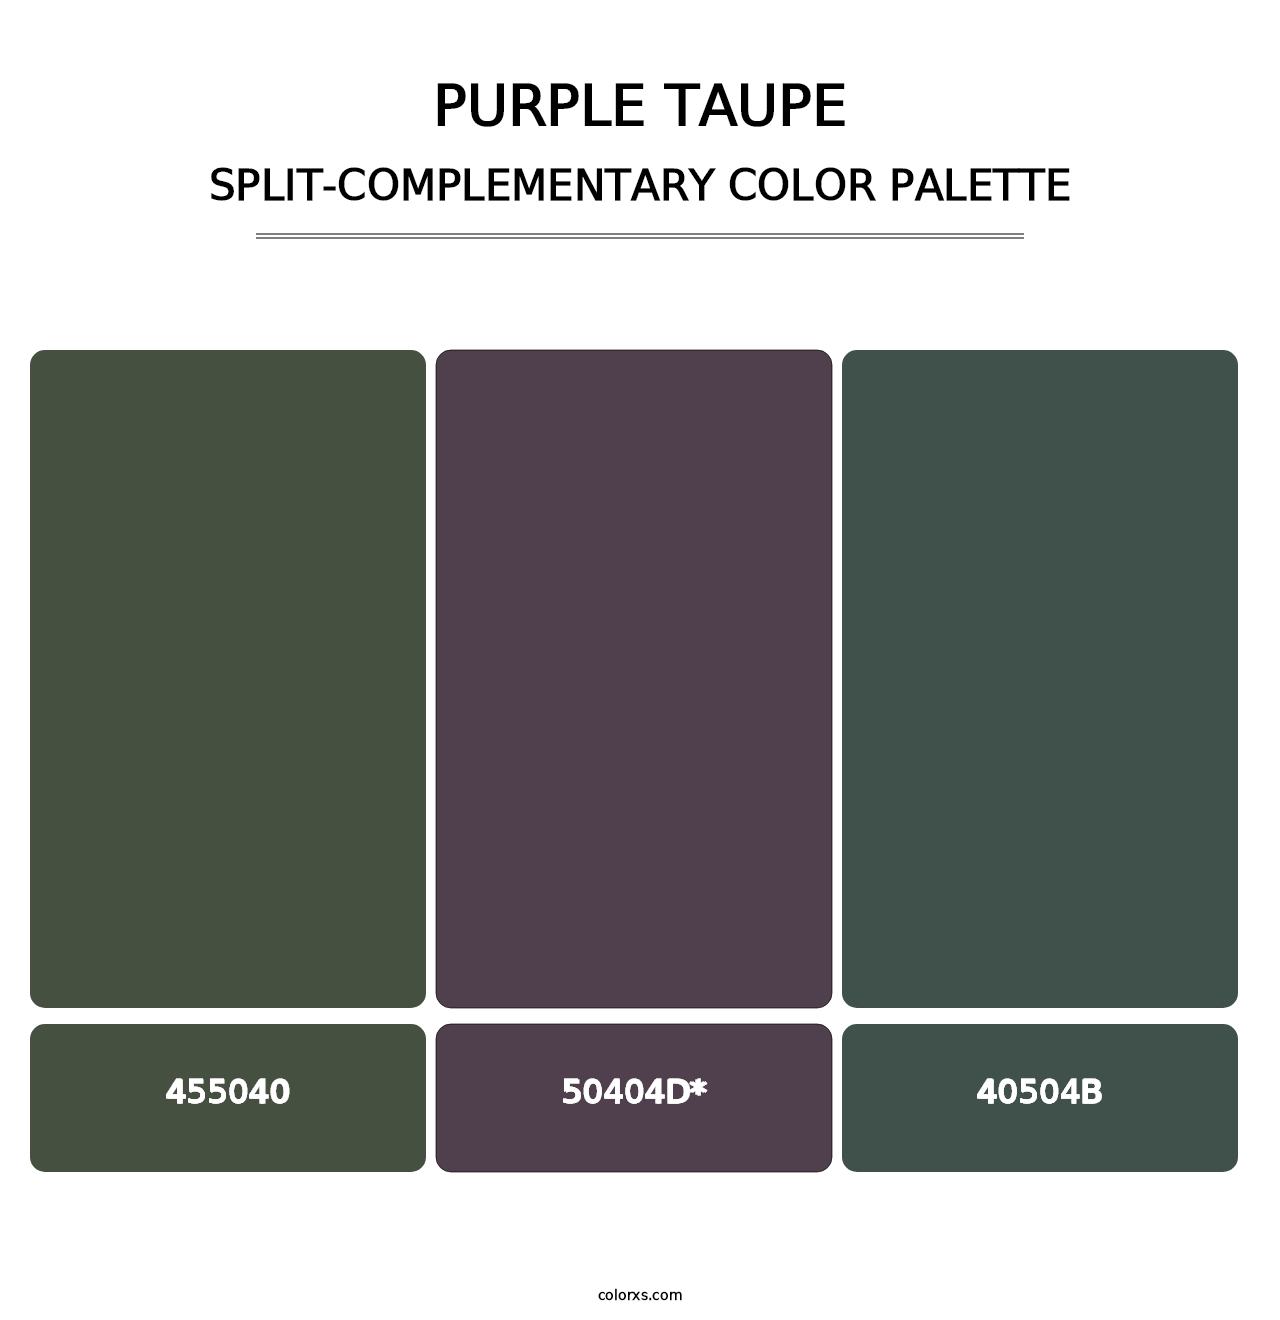 Purple Taupe - Split-Complementary Color Palette